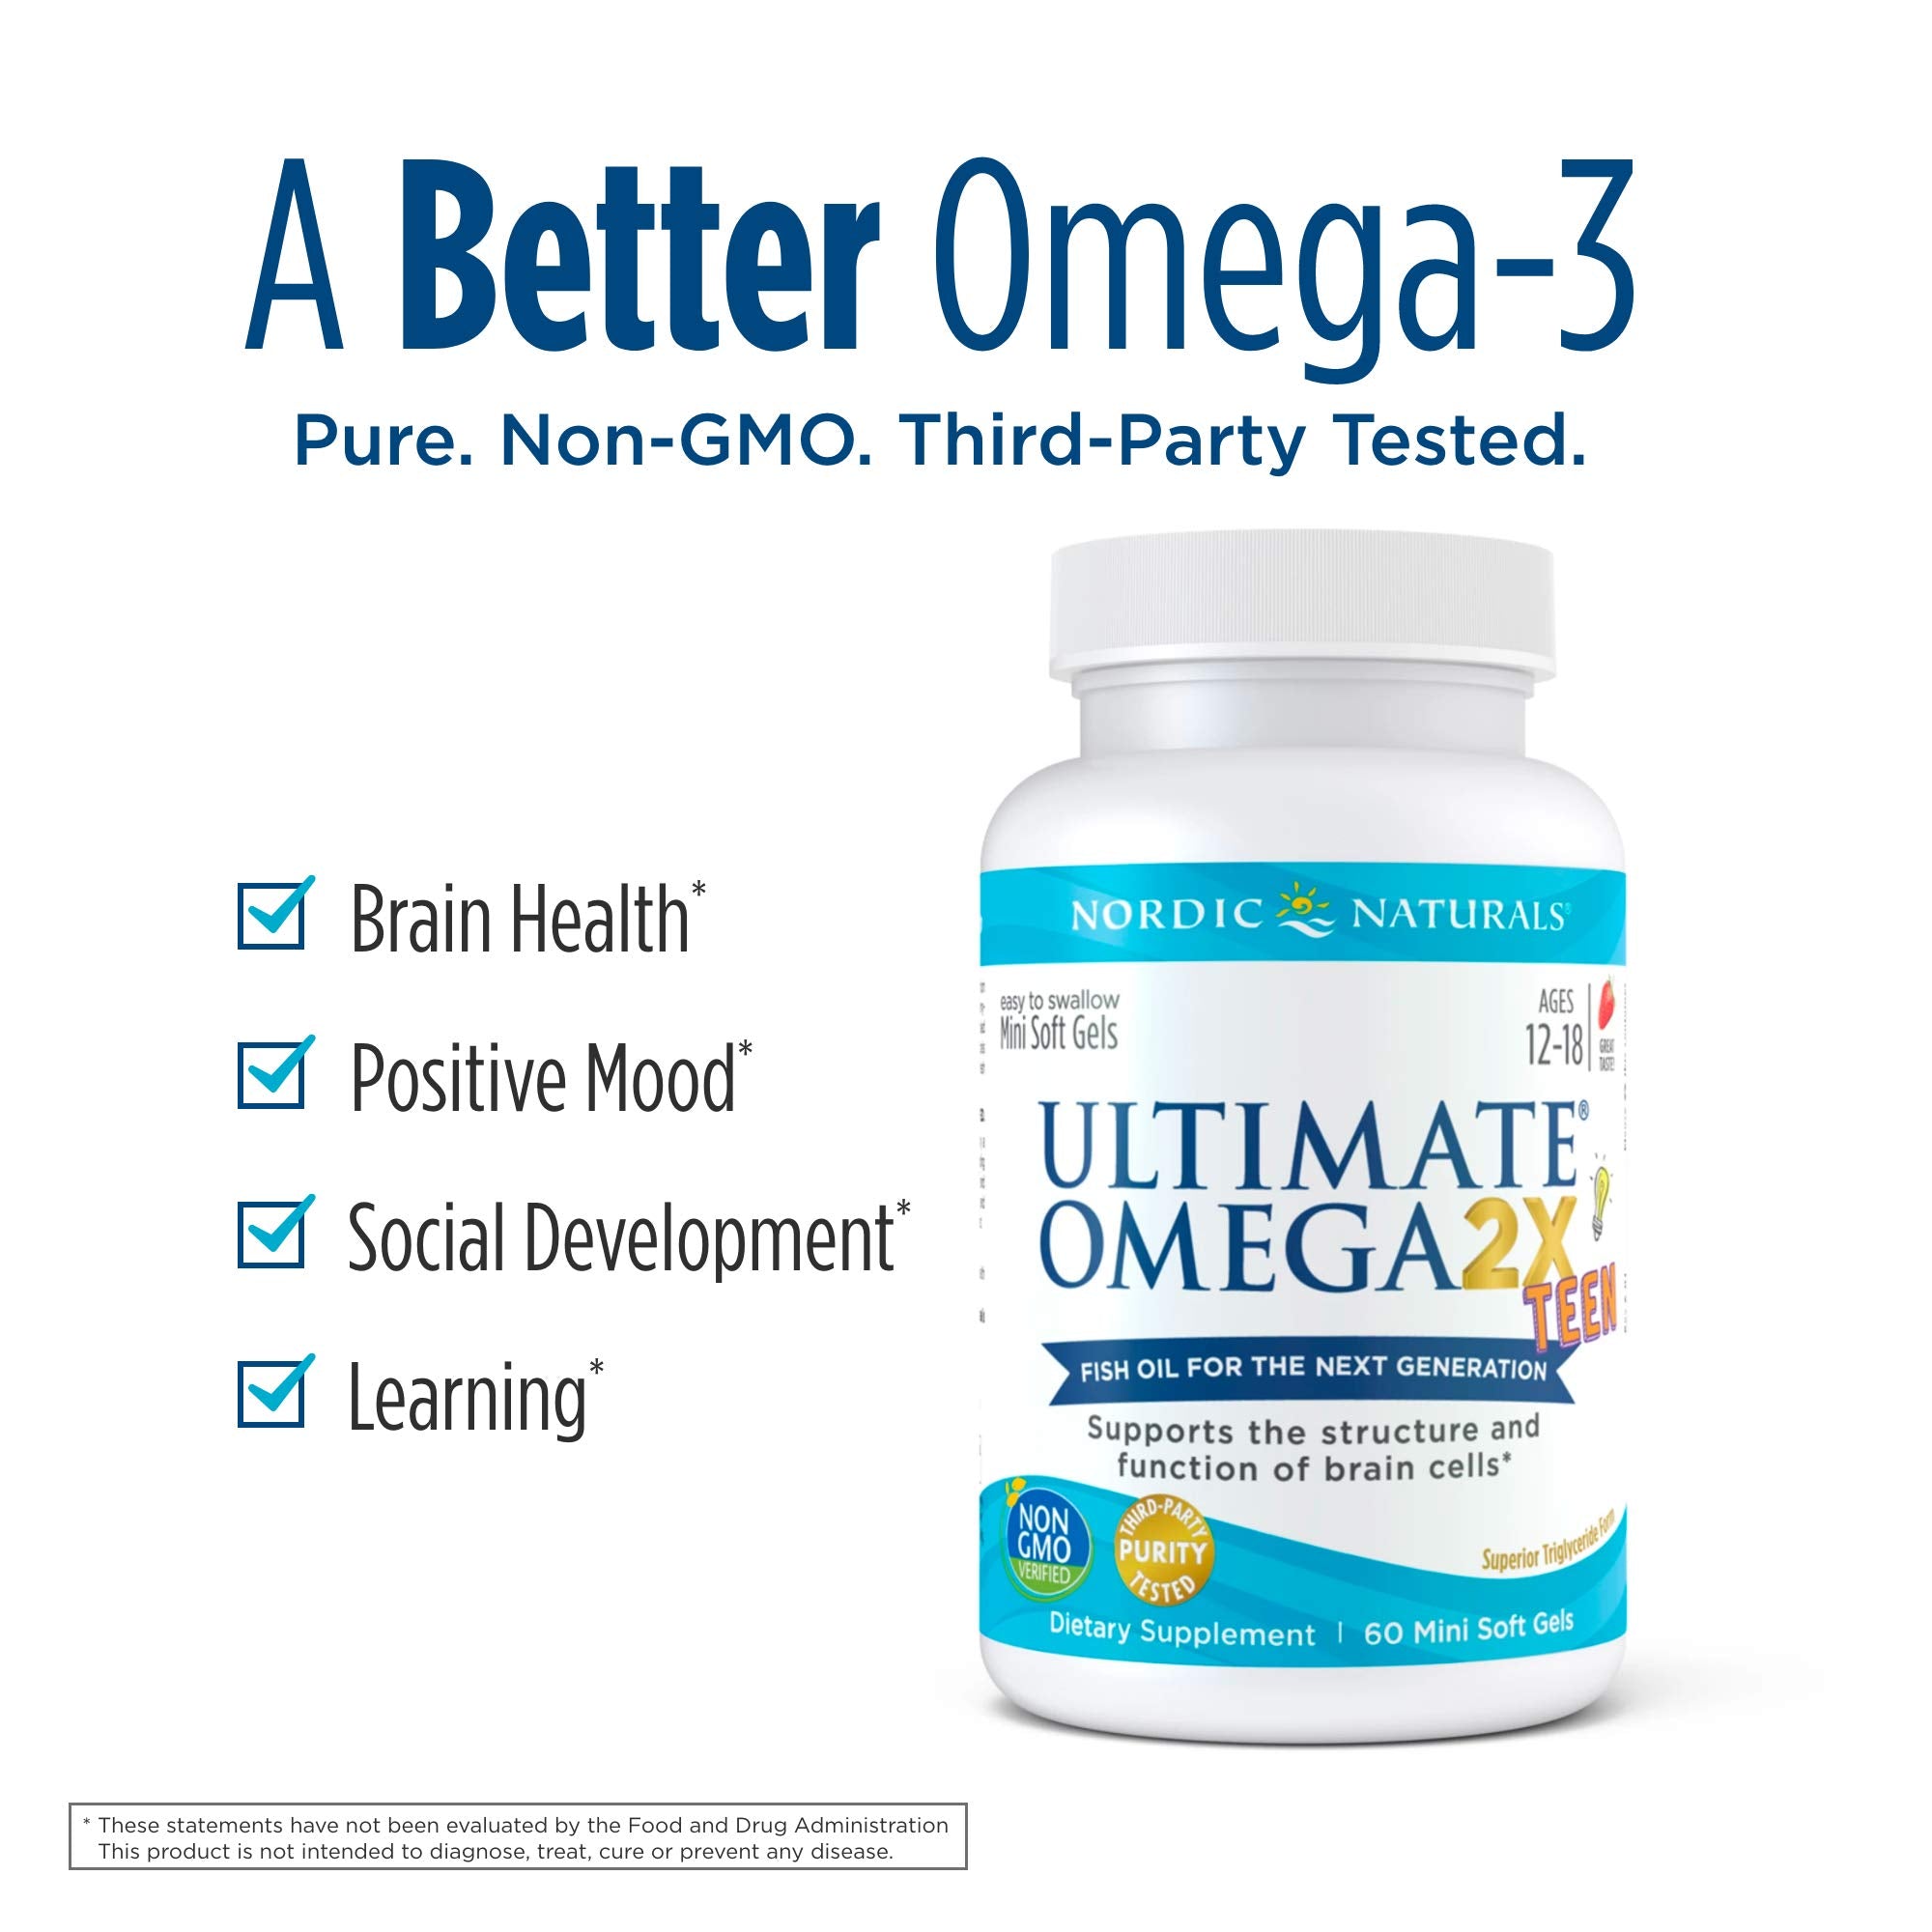 Nordic Naturals Ultimate Omega 2x Teen - Nordic Naturals Omega 3 Formula for Cognitive Development, Learning and Mood in Teenagers, Soft Gels - 60 Count